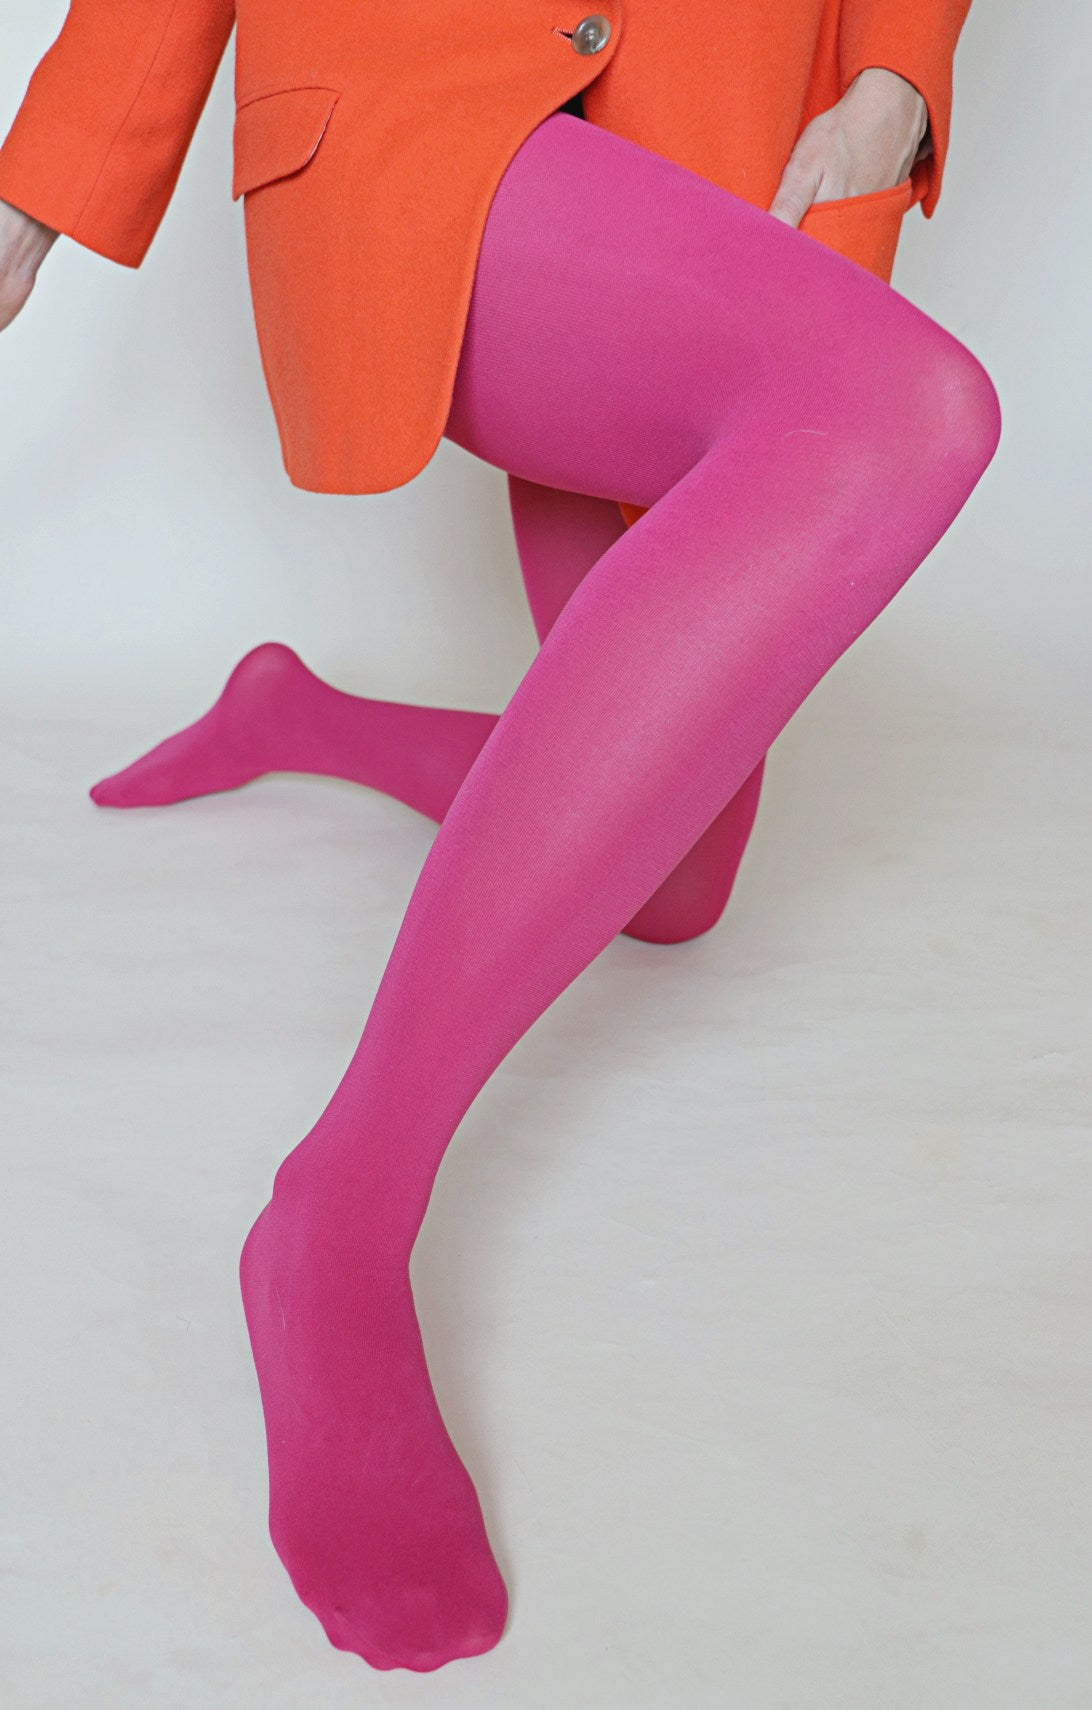 80 denier matte finish "Zokki" opaque tights in bright berry pink, shown worn by a model